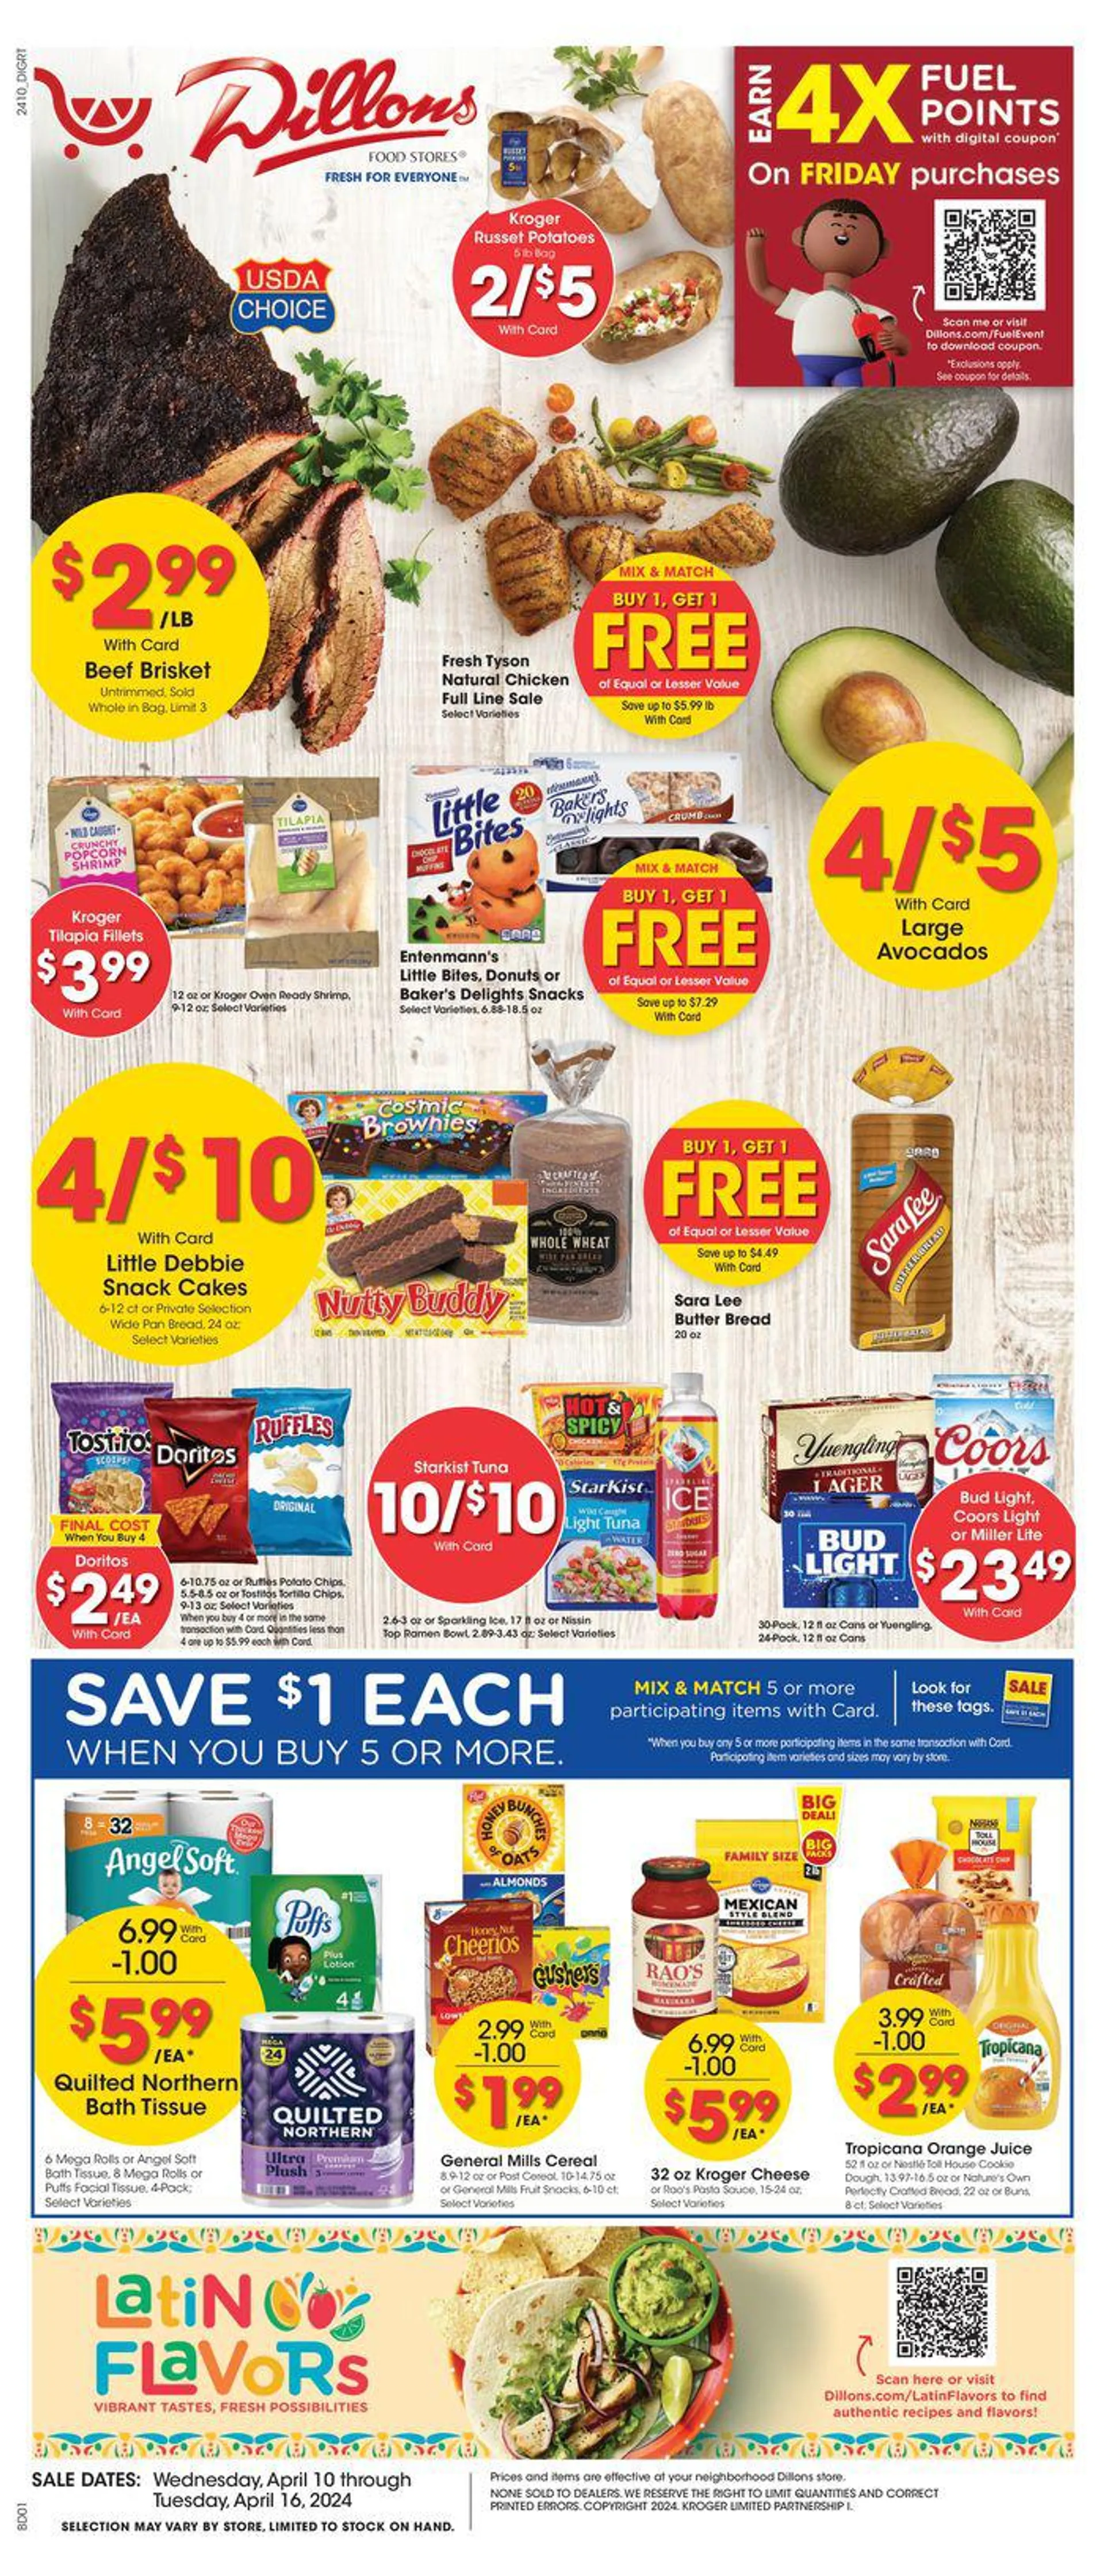 Weekly ad Weekly Ad 10/04 from April 10 to April 16 2024 - Page 